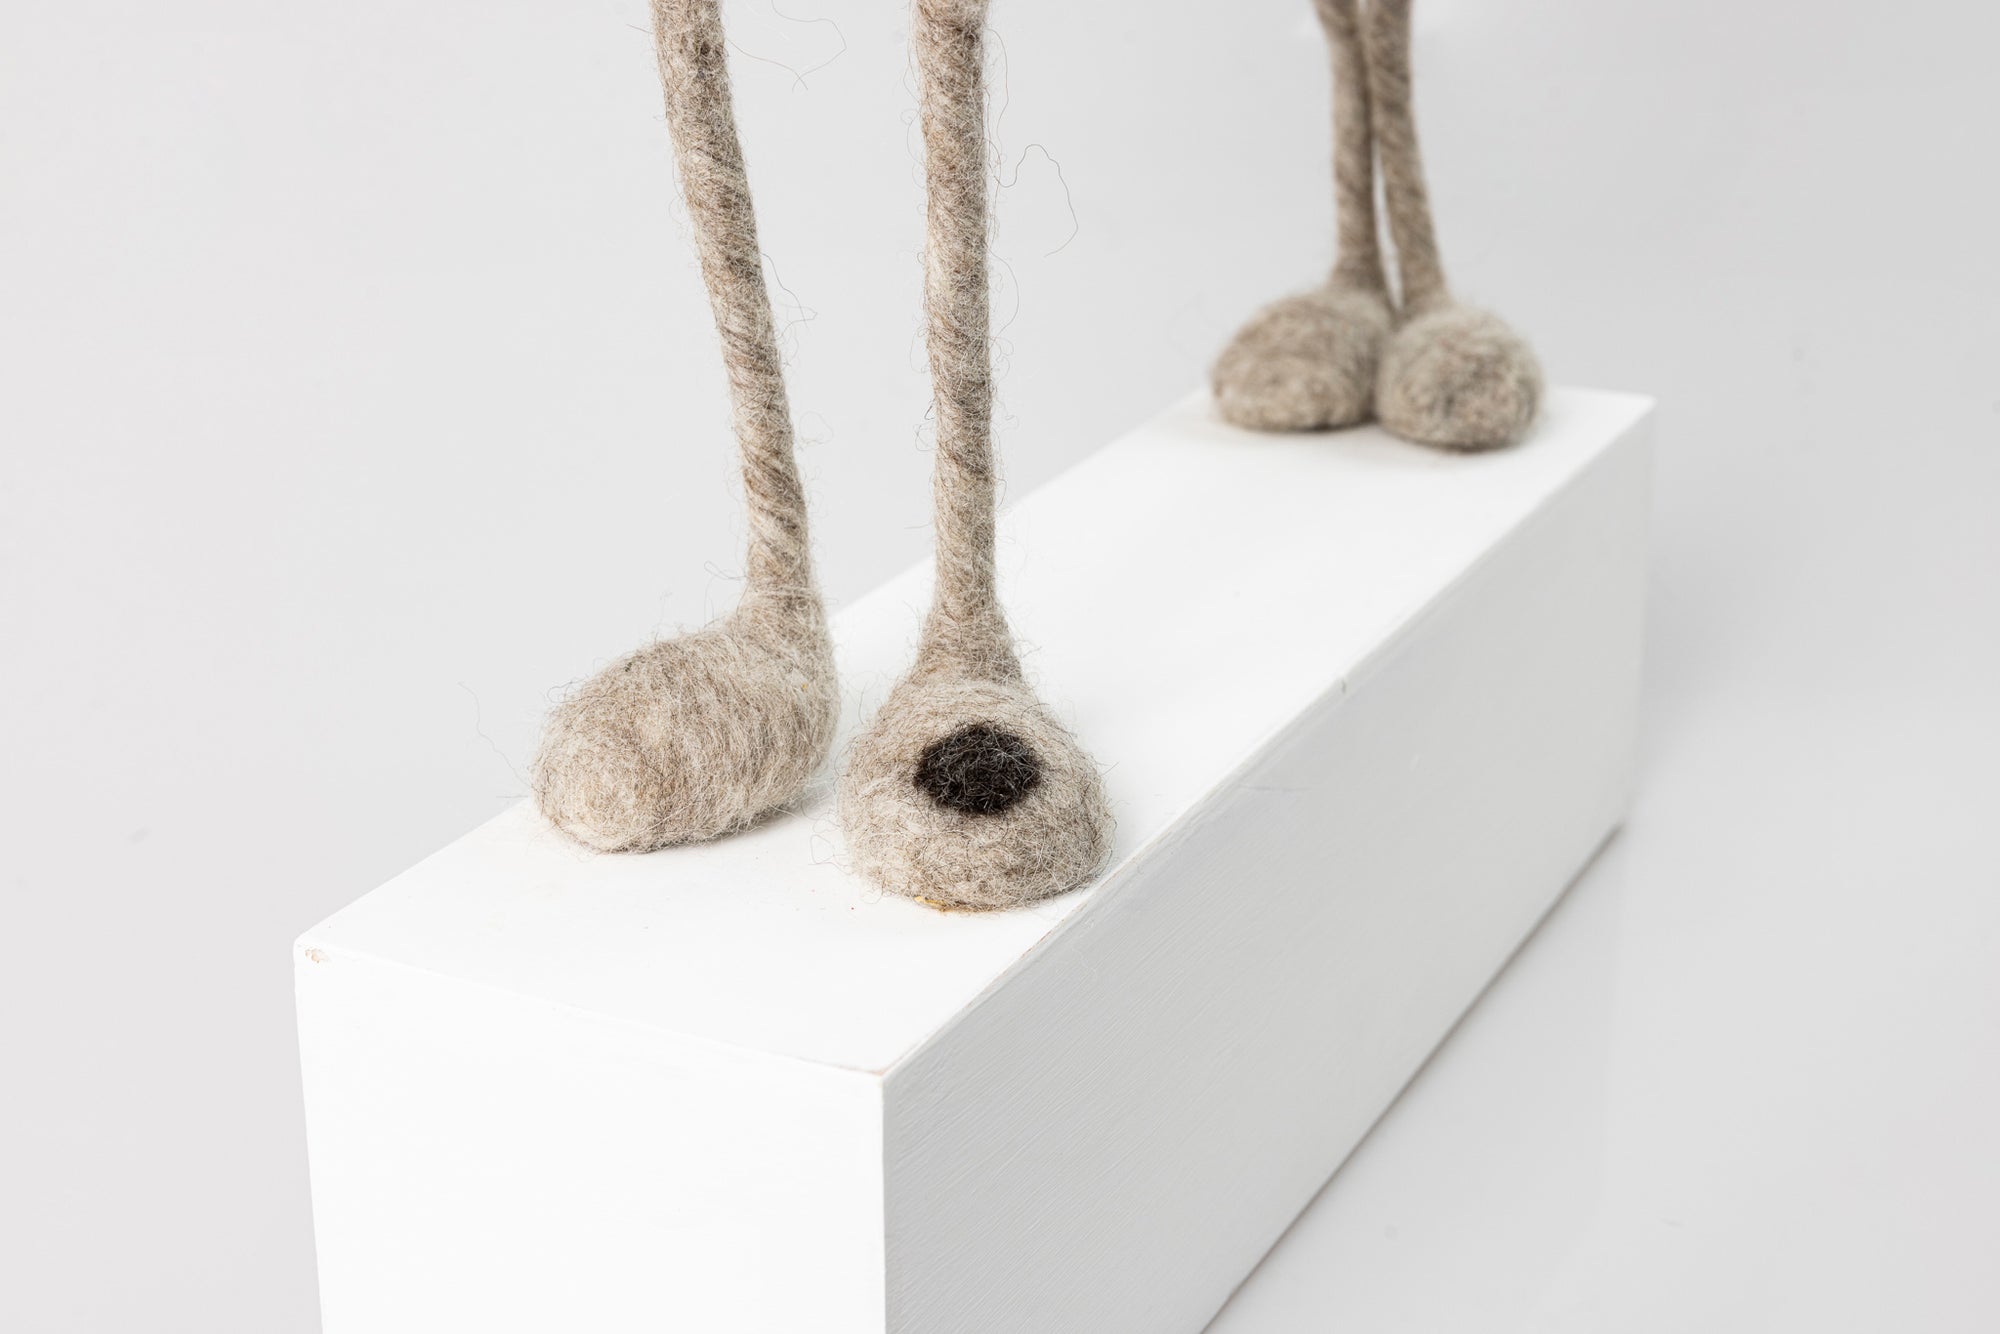 'Razor' needlefelt character dog by Kate Toms, available at Padstow Gallery, Cornwall